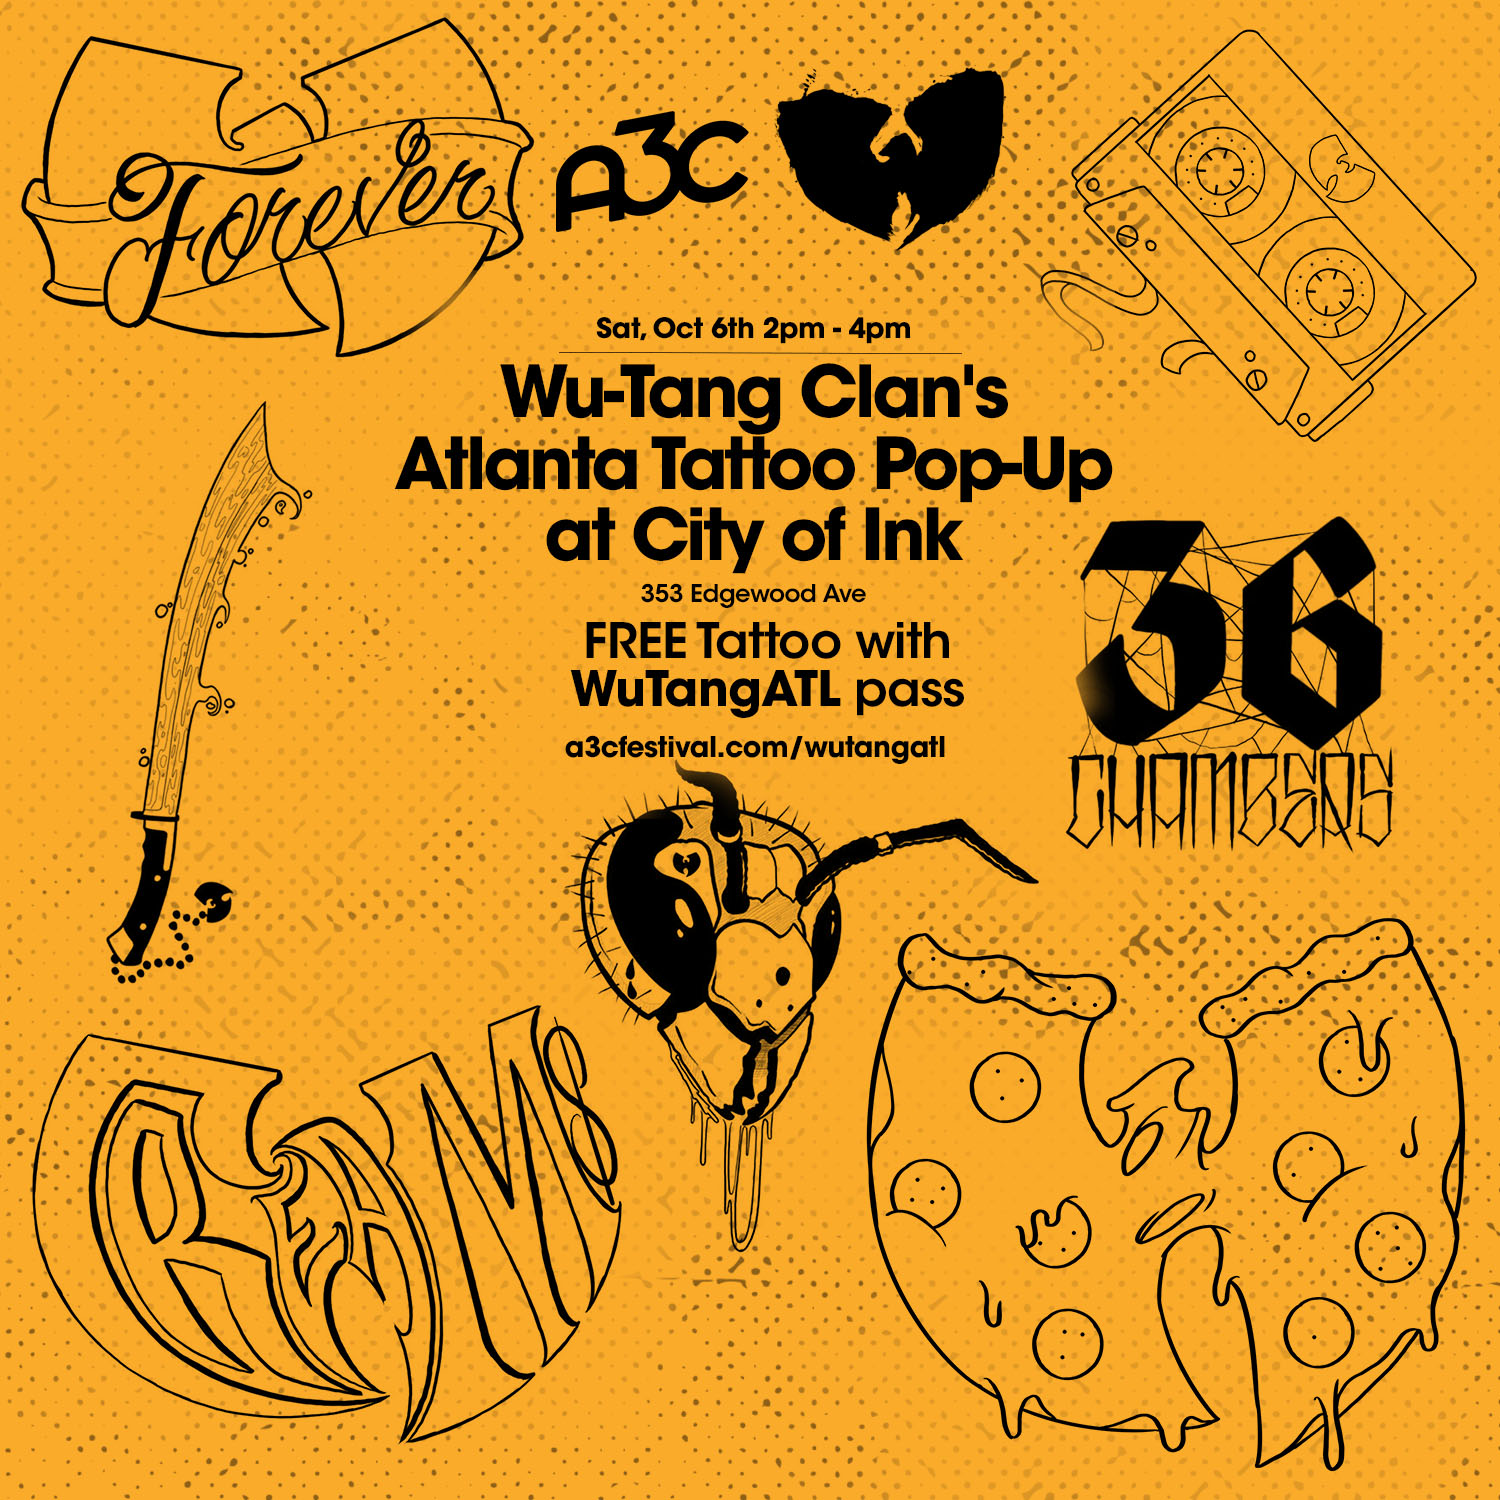 The Marked Society  Kennie did this Wu Tang tattoo today  Facebook